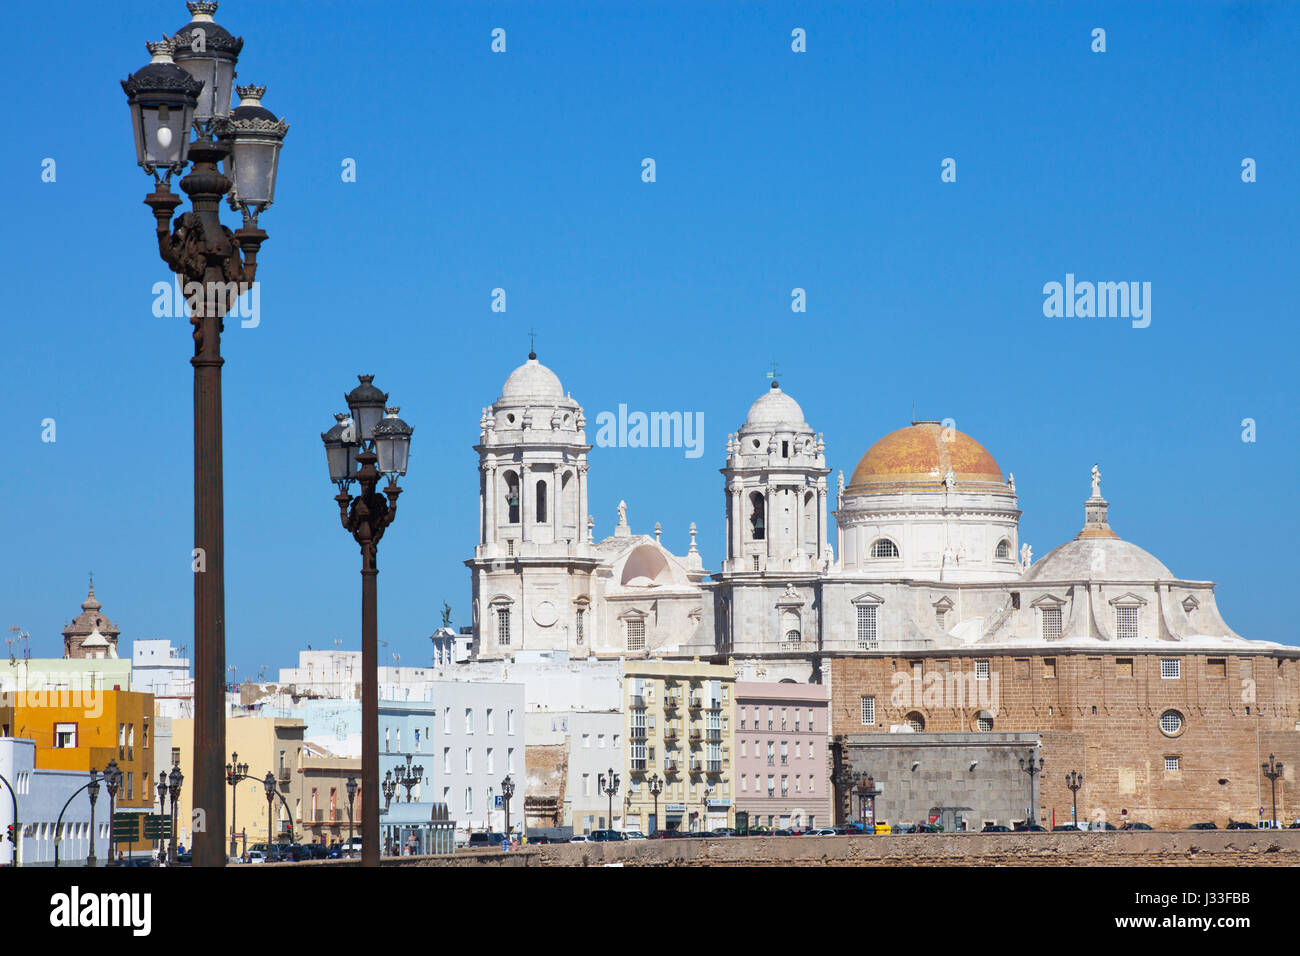 Cathedral in the historical town of Cadiz, Cadiz Province, Andalusia, Spain, Europe Stock Photo